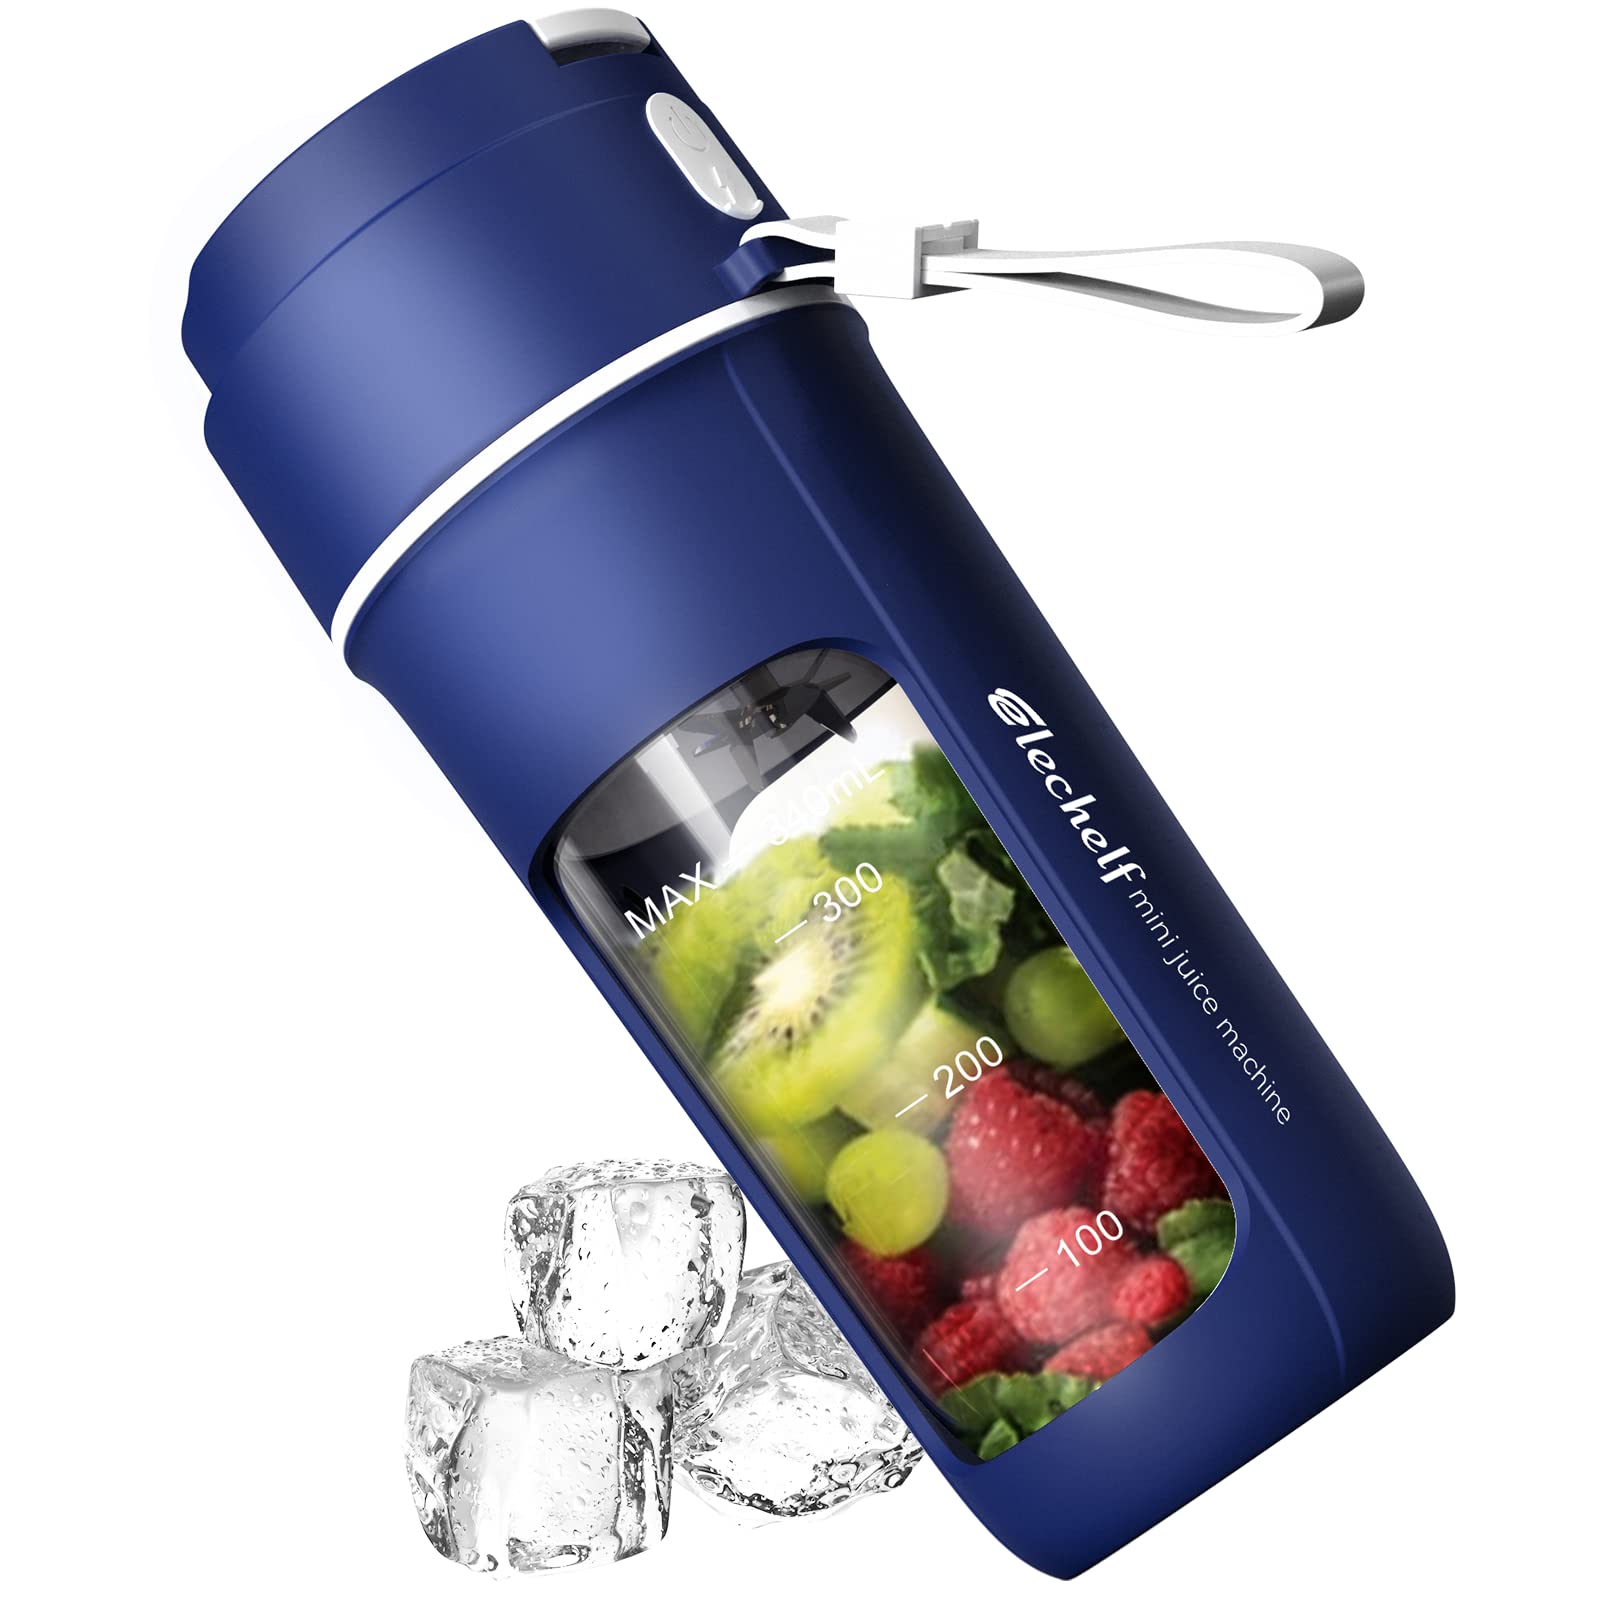 Tenswall Portable, Personal Size Smoothies and Shakes, White Handheld Fruit  Mach